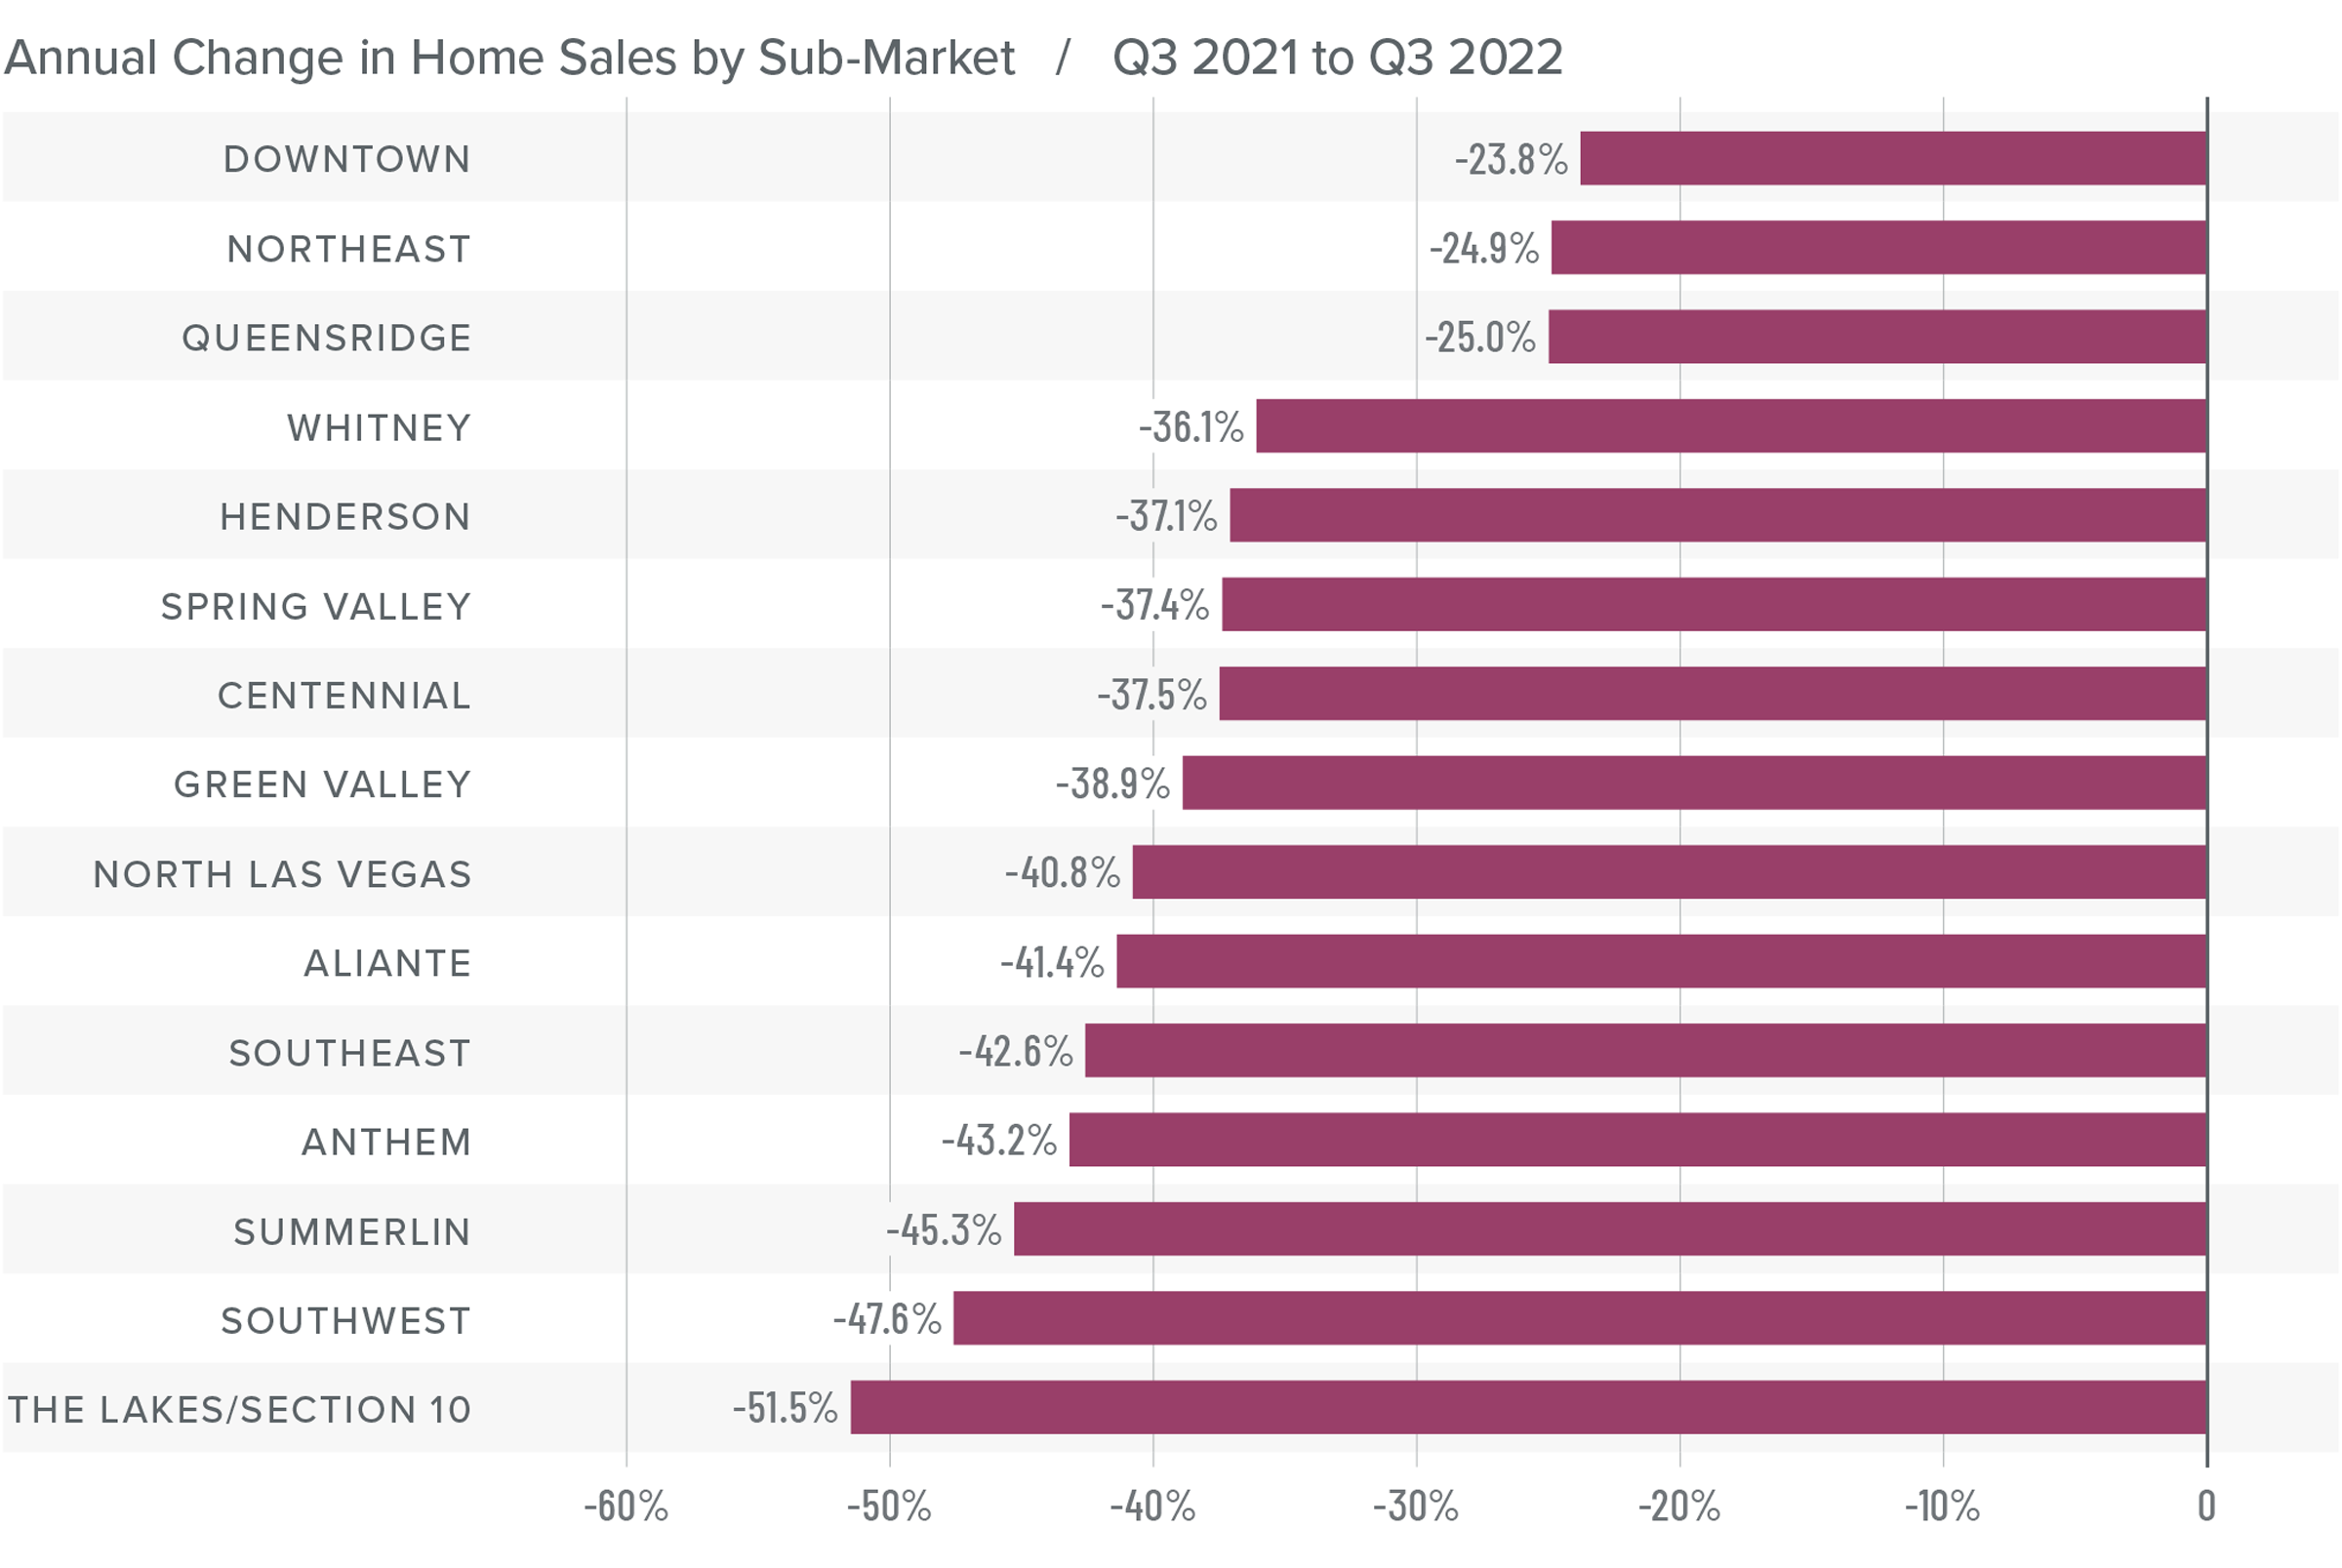 A bar graph showing the annual change in home sales for various sub-market areas in Greater Las Vegas from Q3 2021 to Q3 2022. All sub-market areas listed showed a negative year-over-year percentage change. Downtown had a -23.8% change, followed by Northeast at -24.9%, Queensridge at -25%, Whitney at -36.1%, Henderson at -37.1%, Spring Valley at -37.4%, Centennial at -37.5%, Green Valley at -38.9%, North Las Vegas at -40.8%, Alliante at -41.4%, Southeast at -42.6%, Anthem at -43.2%, Summerlin at 45.3%, Southwest at -47.6%, andThe Lakes / Section 10 at -51.5%.